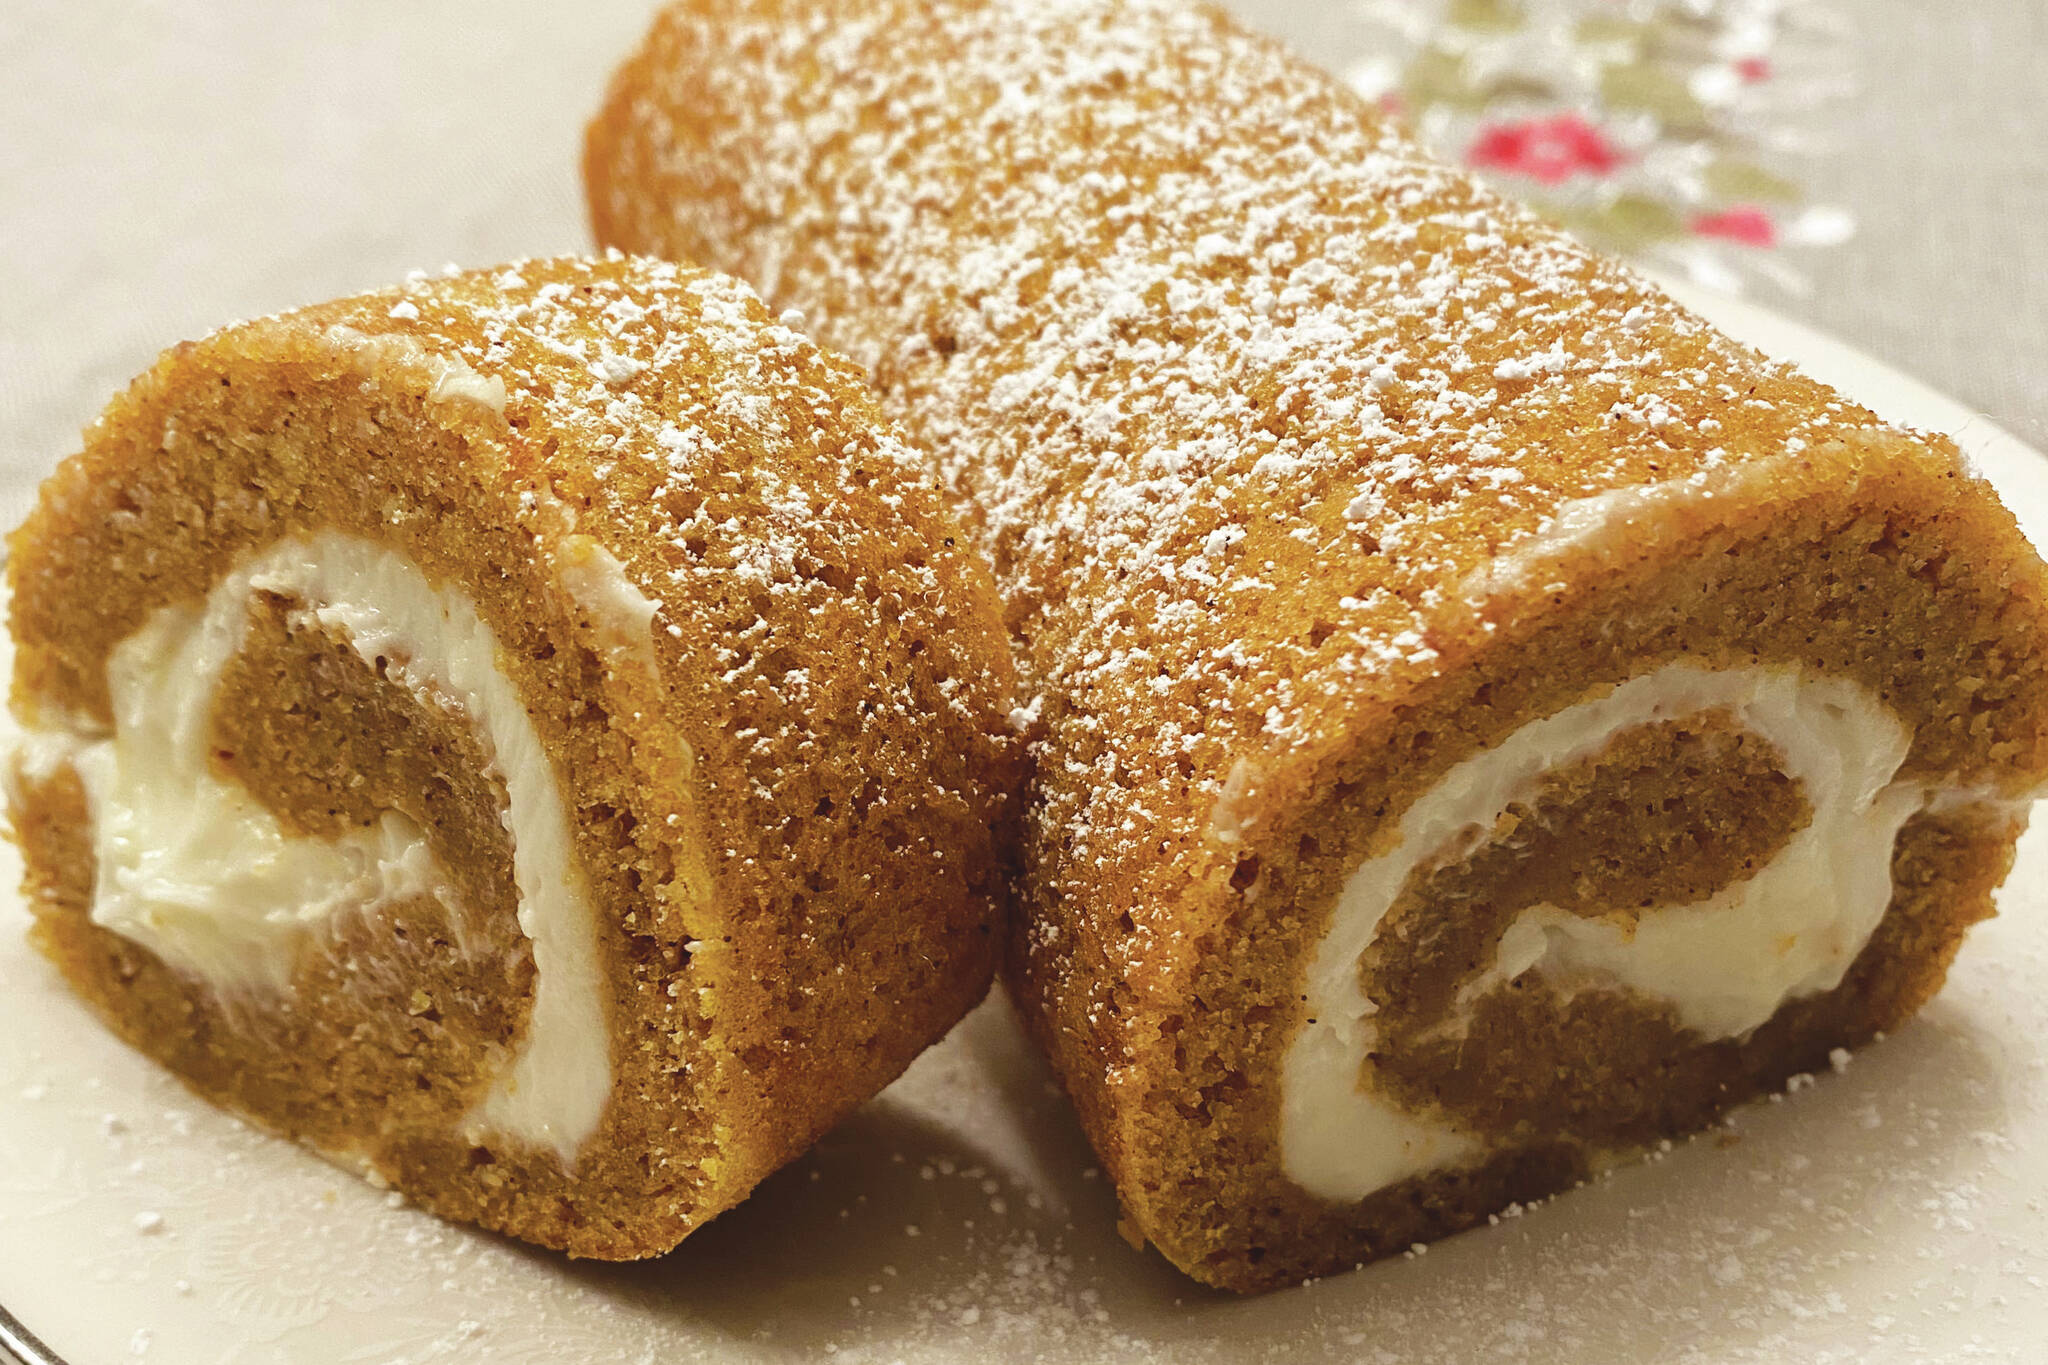 A pumpkin spice roll with cream cheese filling is photographed on Oct. 31, 2022, in Nikiski, Alaska. (Photo by Tressa Dale/Peninsula Clarion)